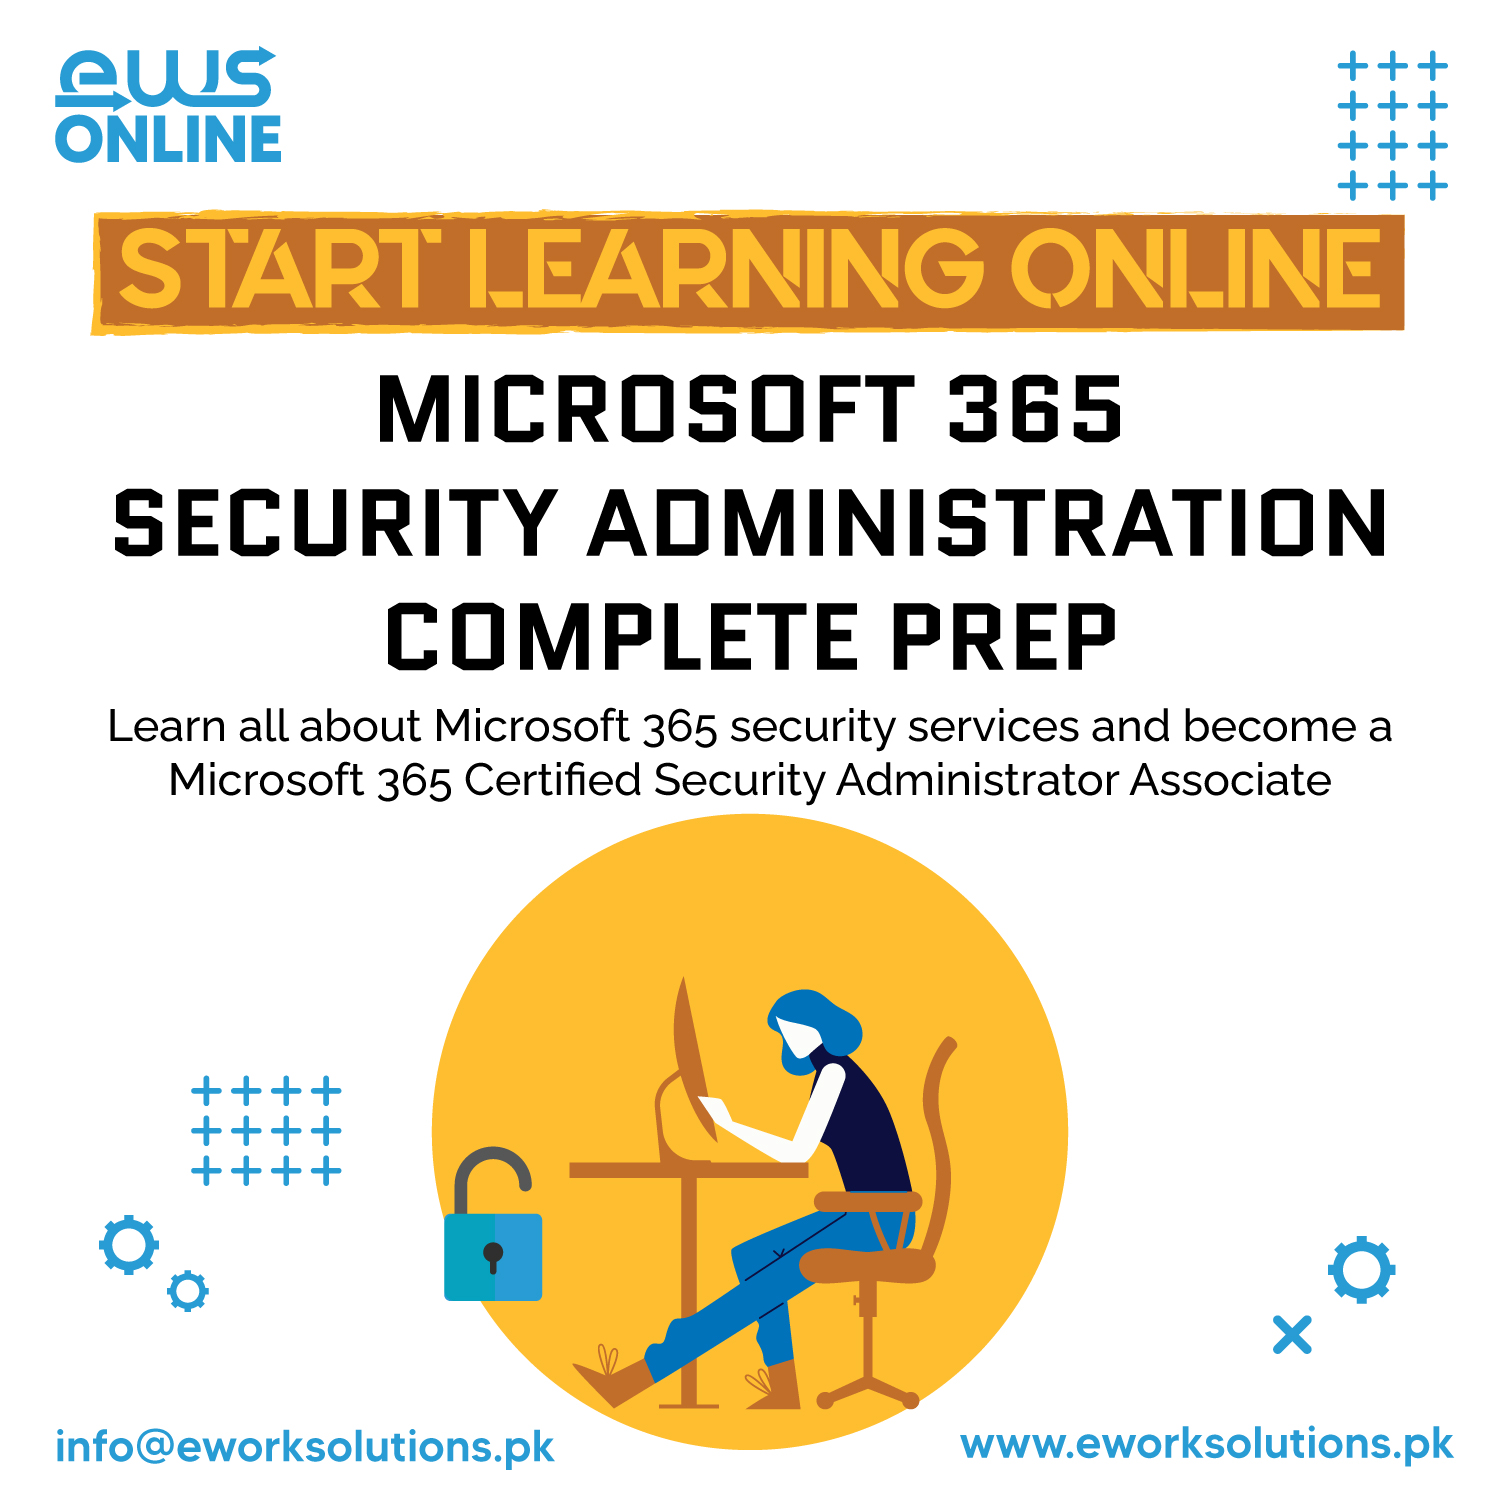 Microsoft 365 Security Administration Complete Prep